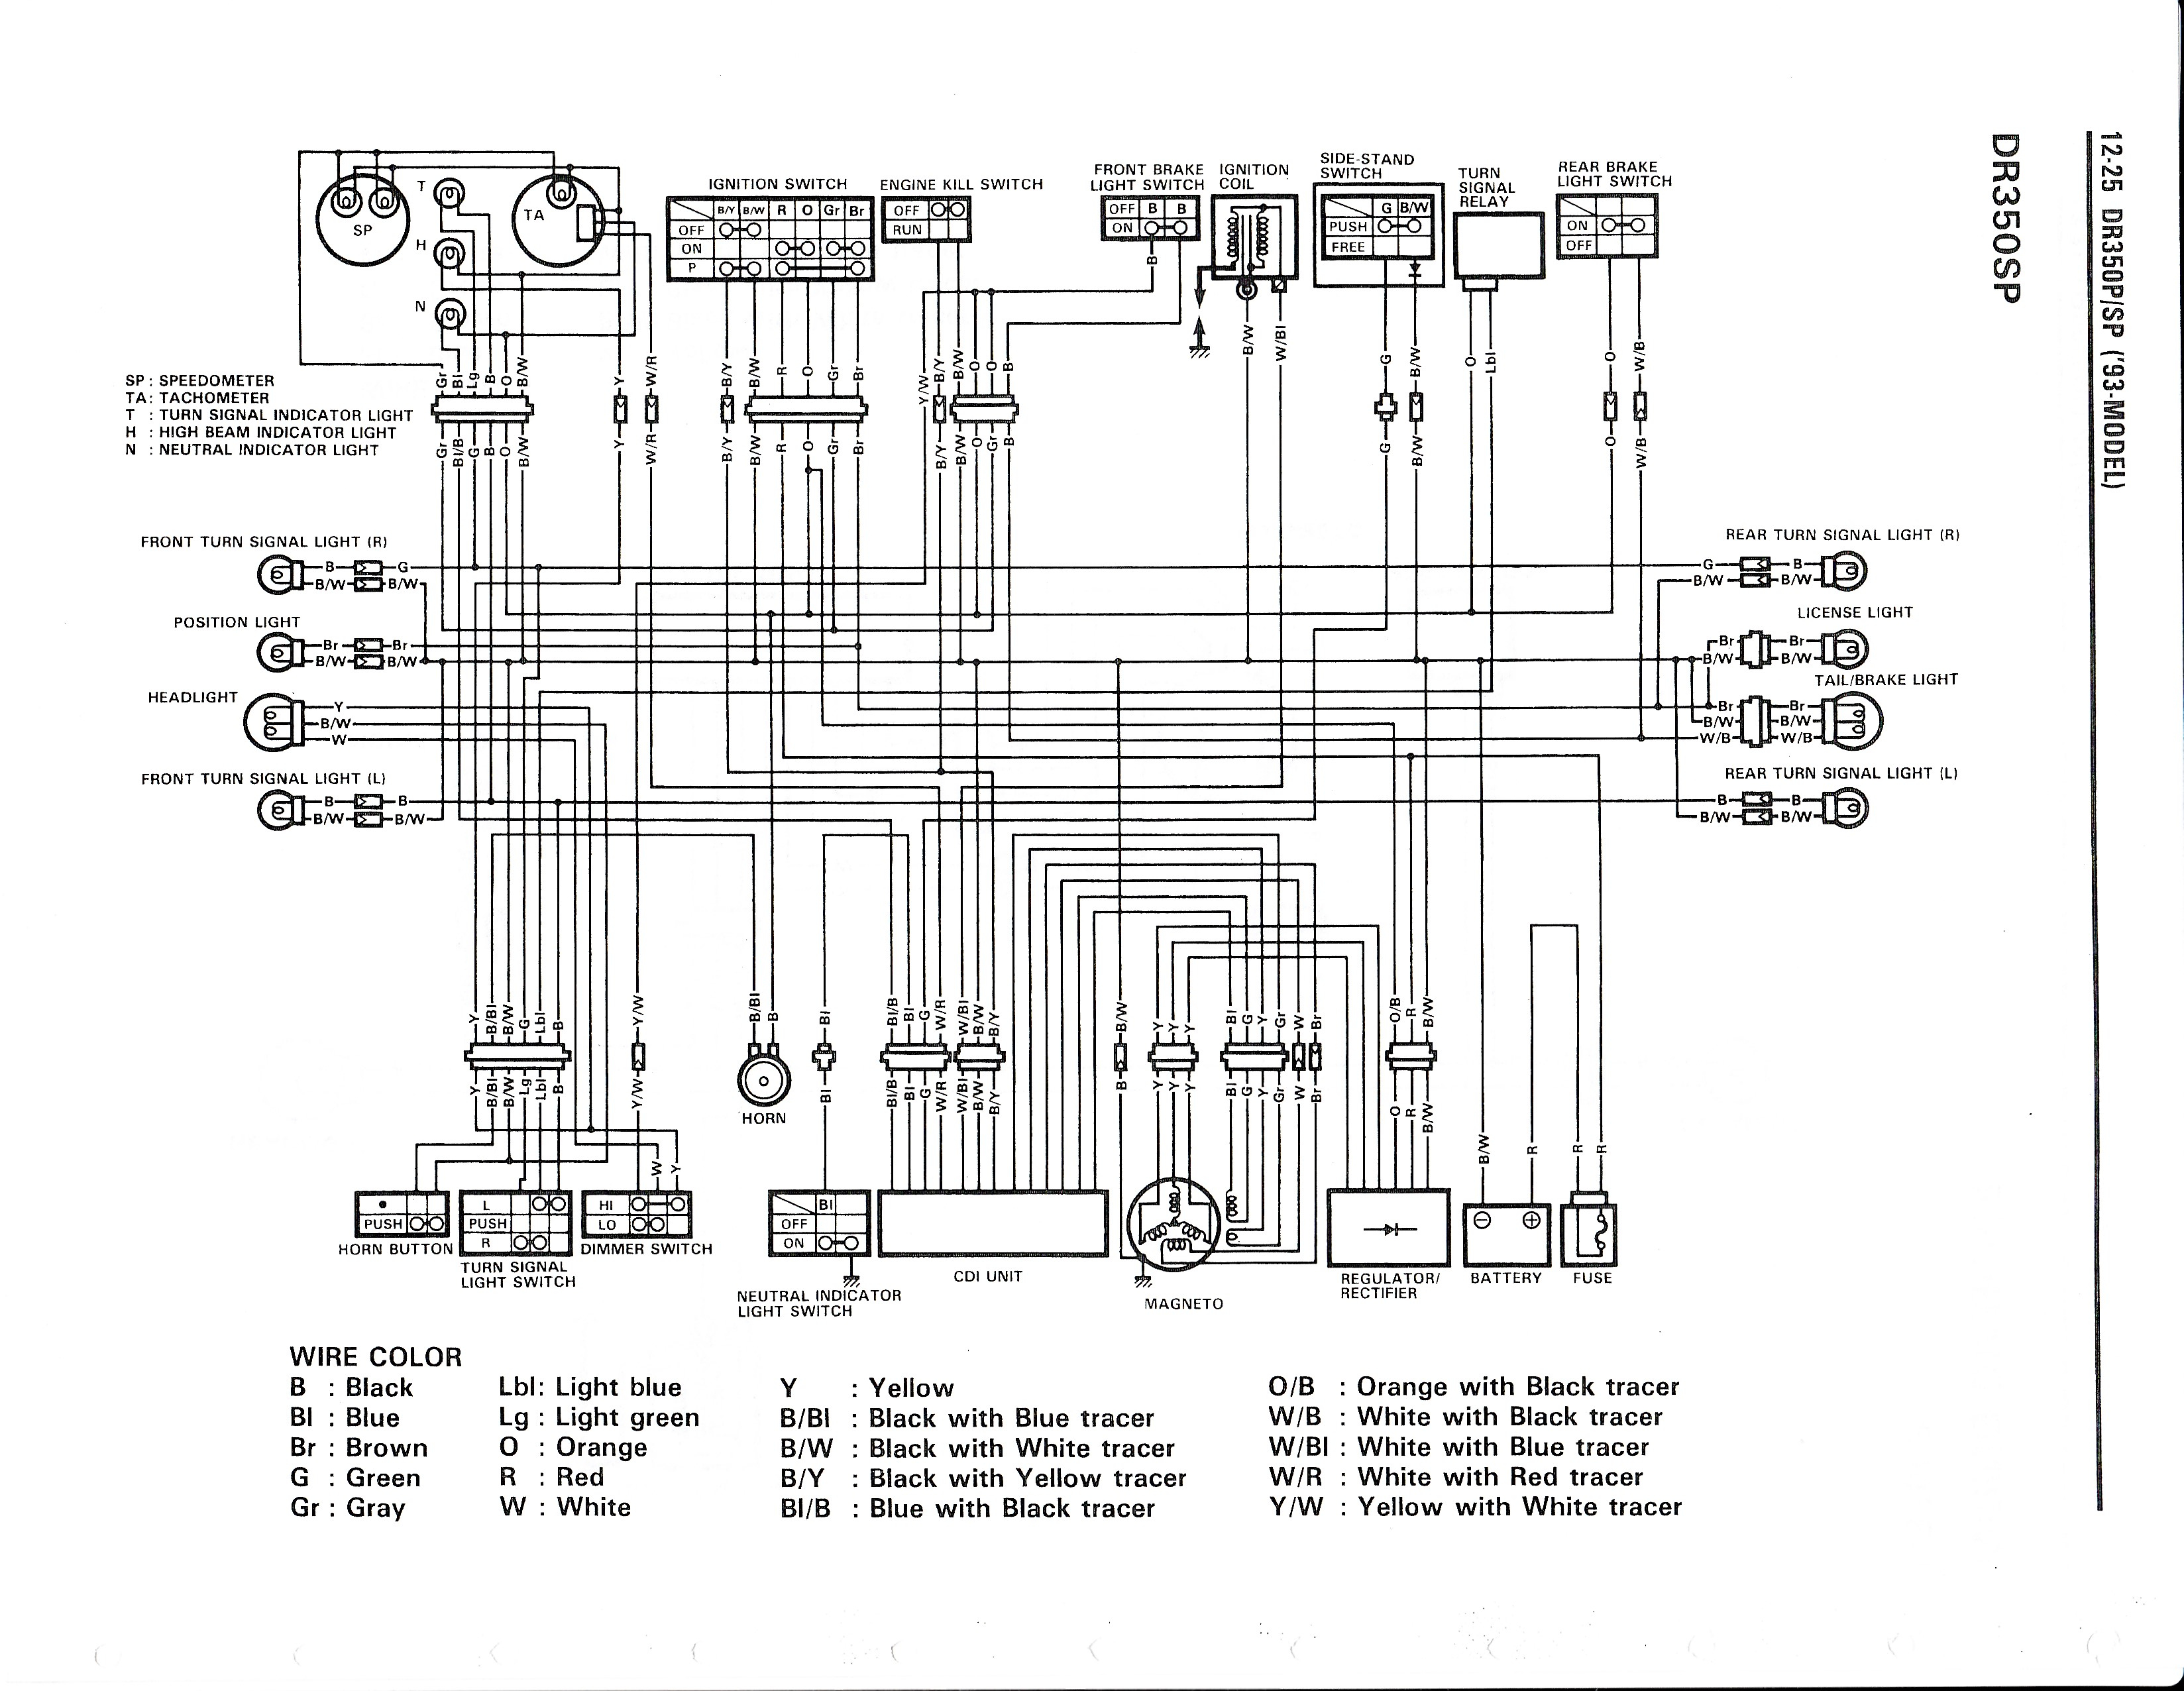 Wiring diagram for the DR350 S (1993 and later models)